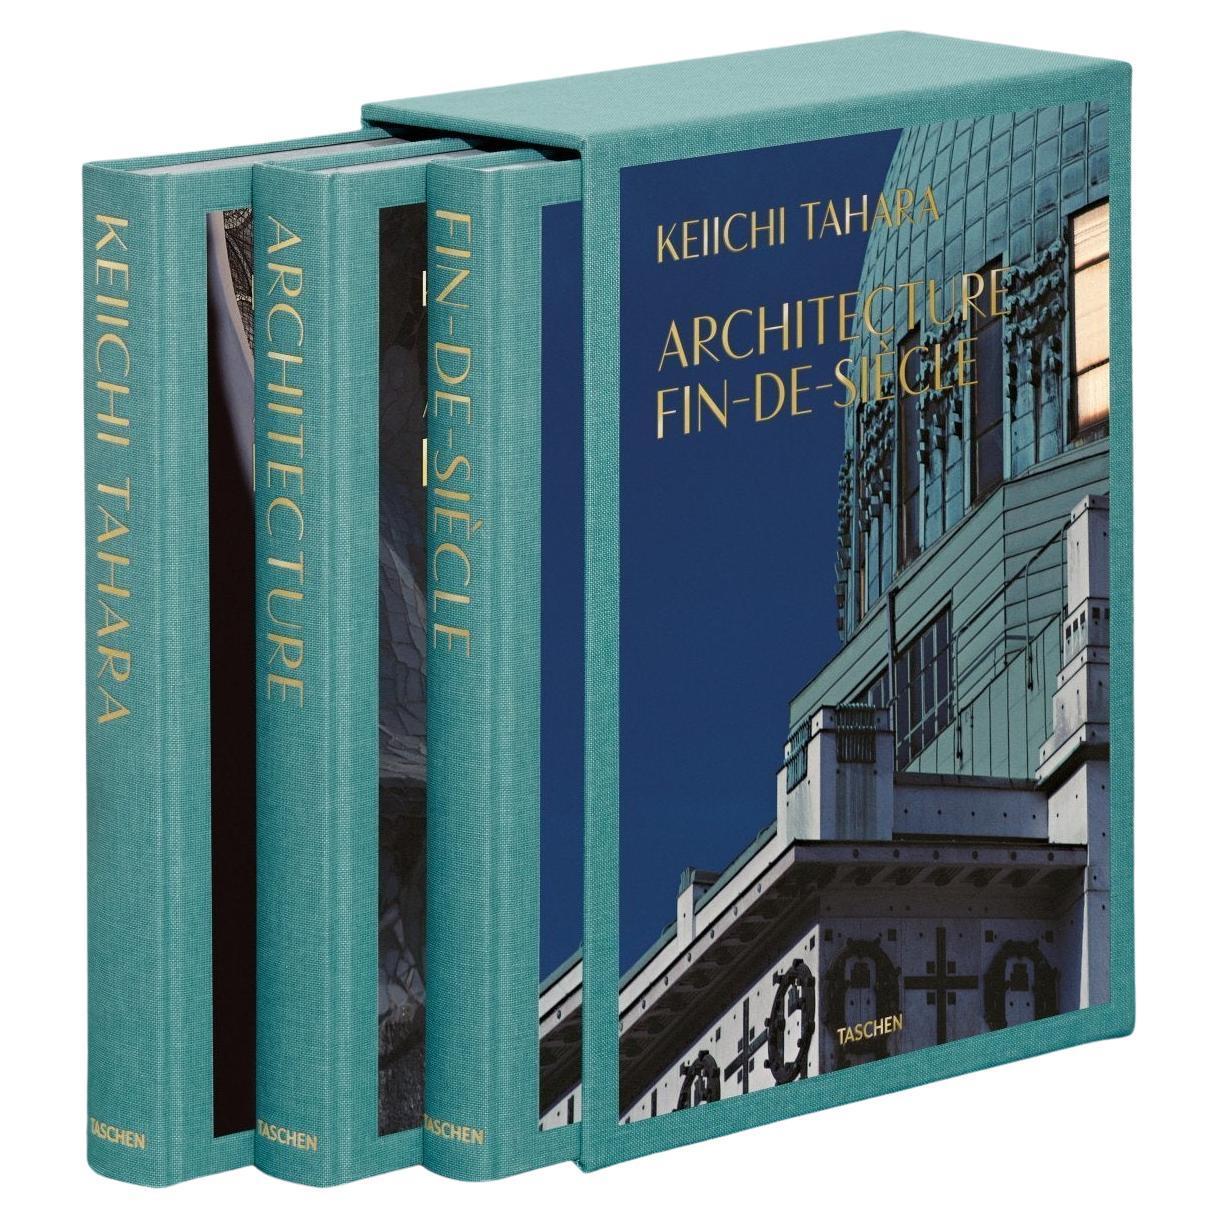 Keiichi Tahara, Architecture Fin-de-Siècle, Limited Edition, Set of 3 Books